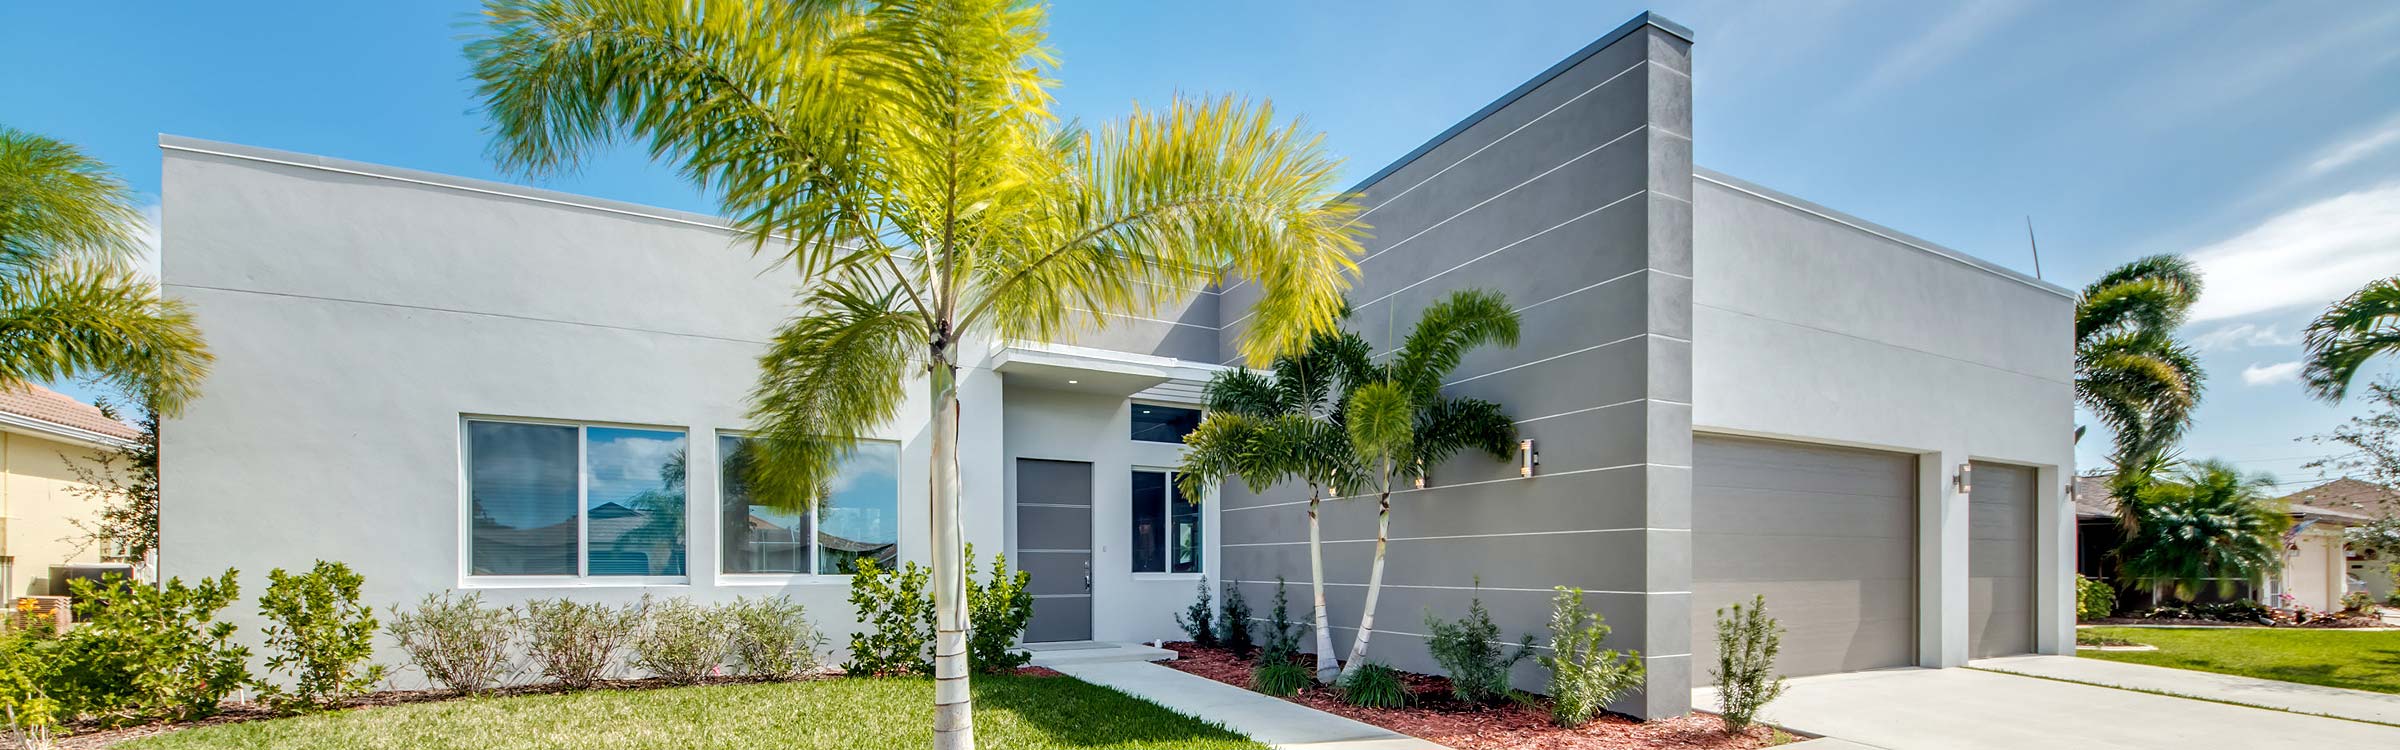 New construction in Cape Coral, Fort Myers, Florida - Construction planning